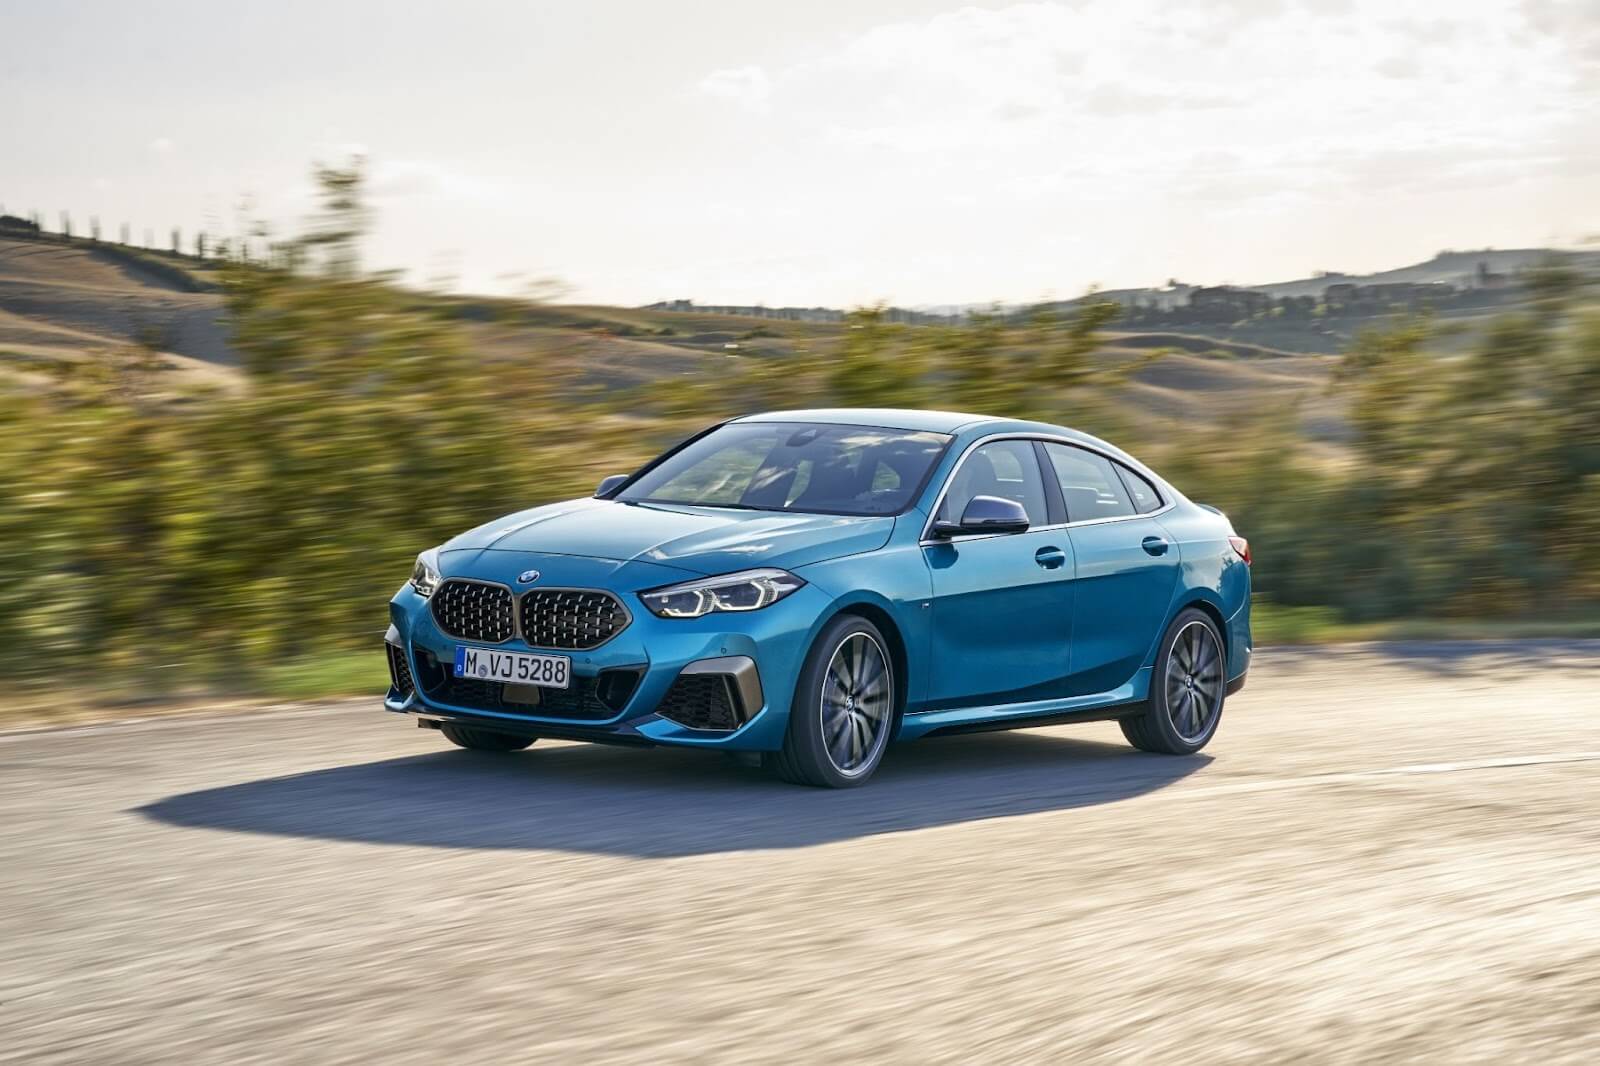 BMW 2 Series Gran Coupe in blue; the cheapest sedan from BMW